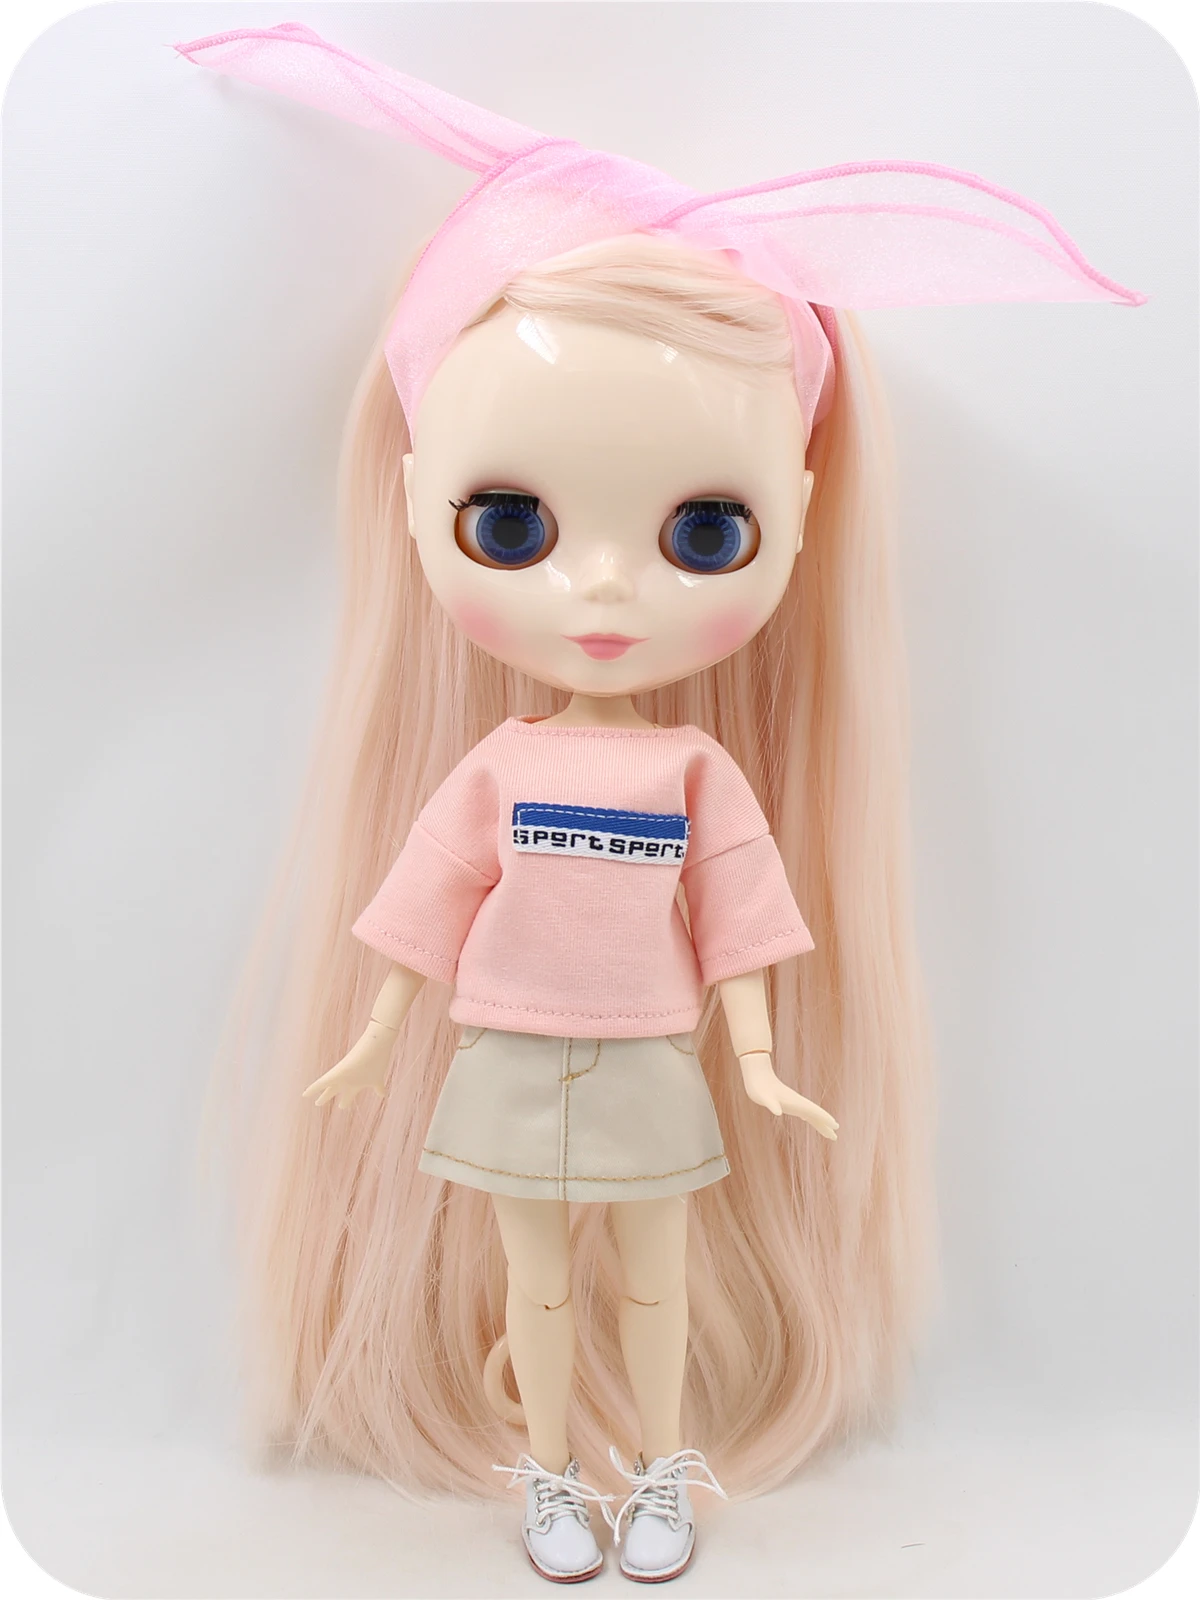 Neo Blythe Doll with Pink Hair, White Skin, Shiny Face & Factory Jointed Body 1